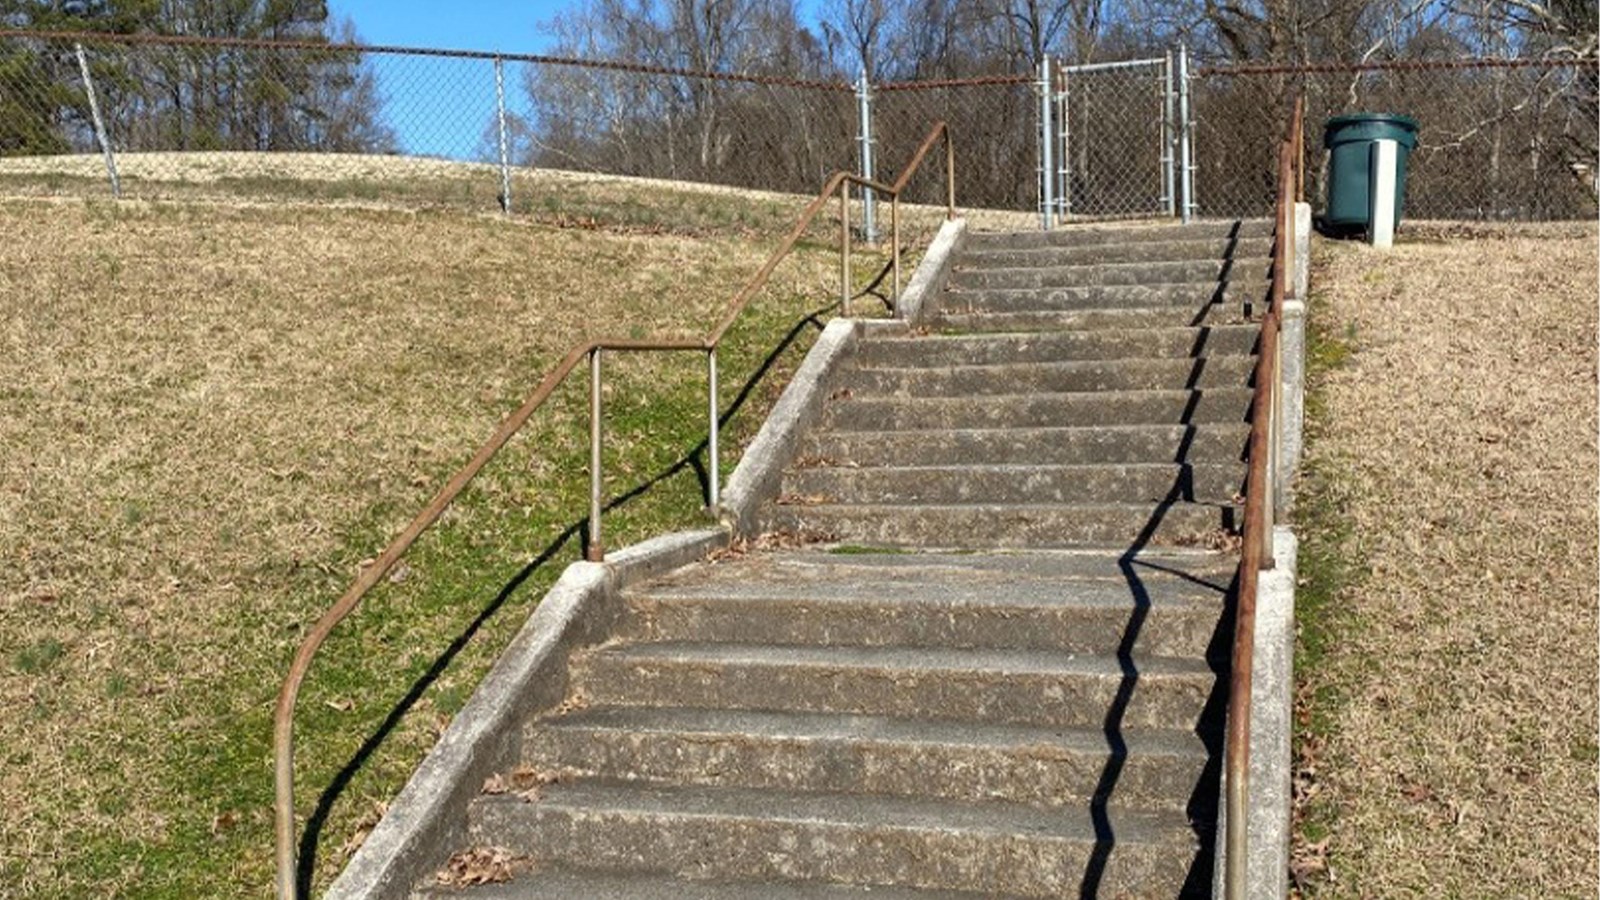 A concrete staircase with metal railing leads to a small grassy park with a chain link fence.